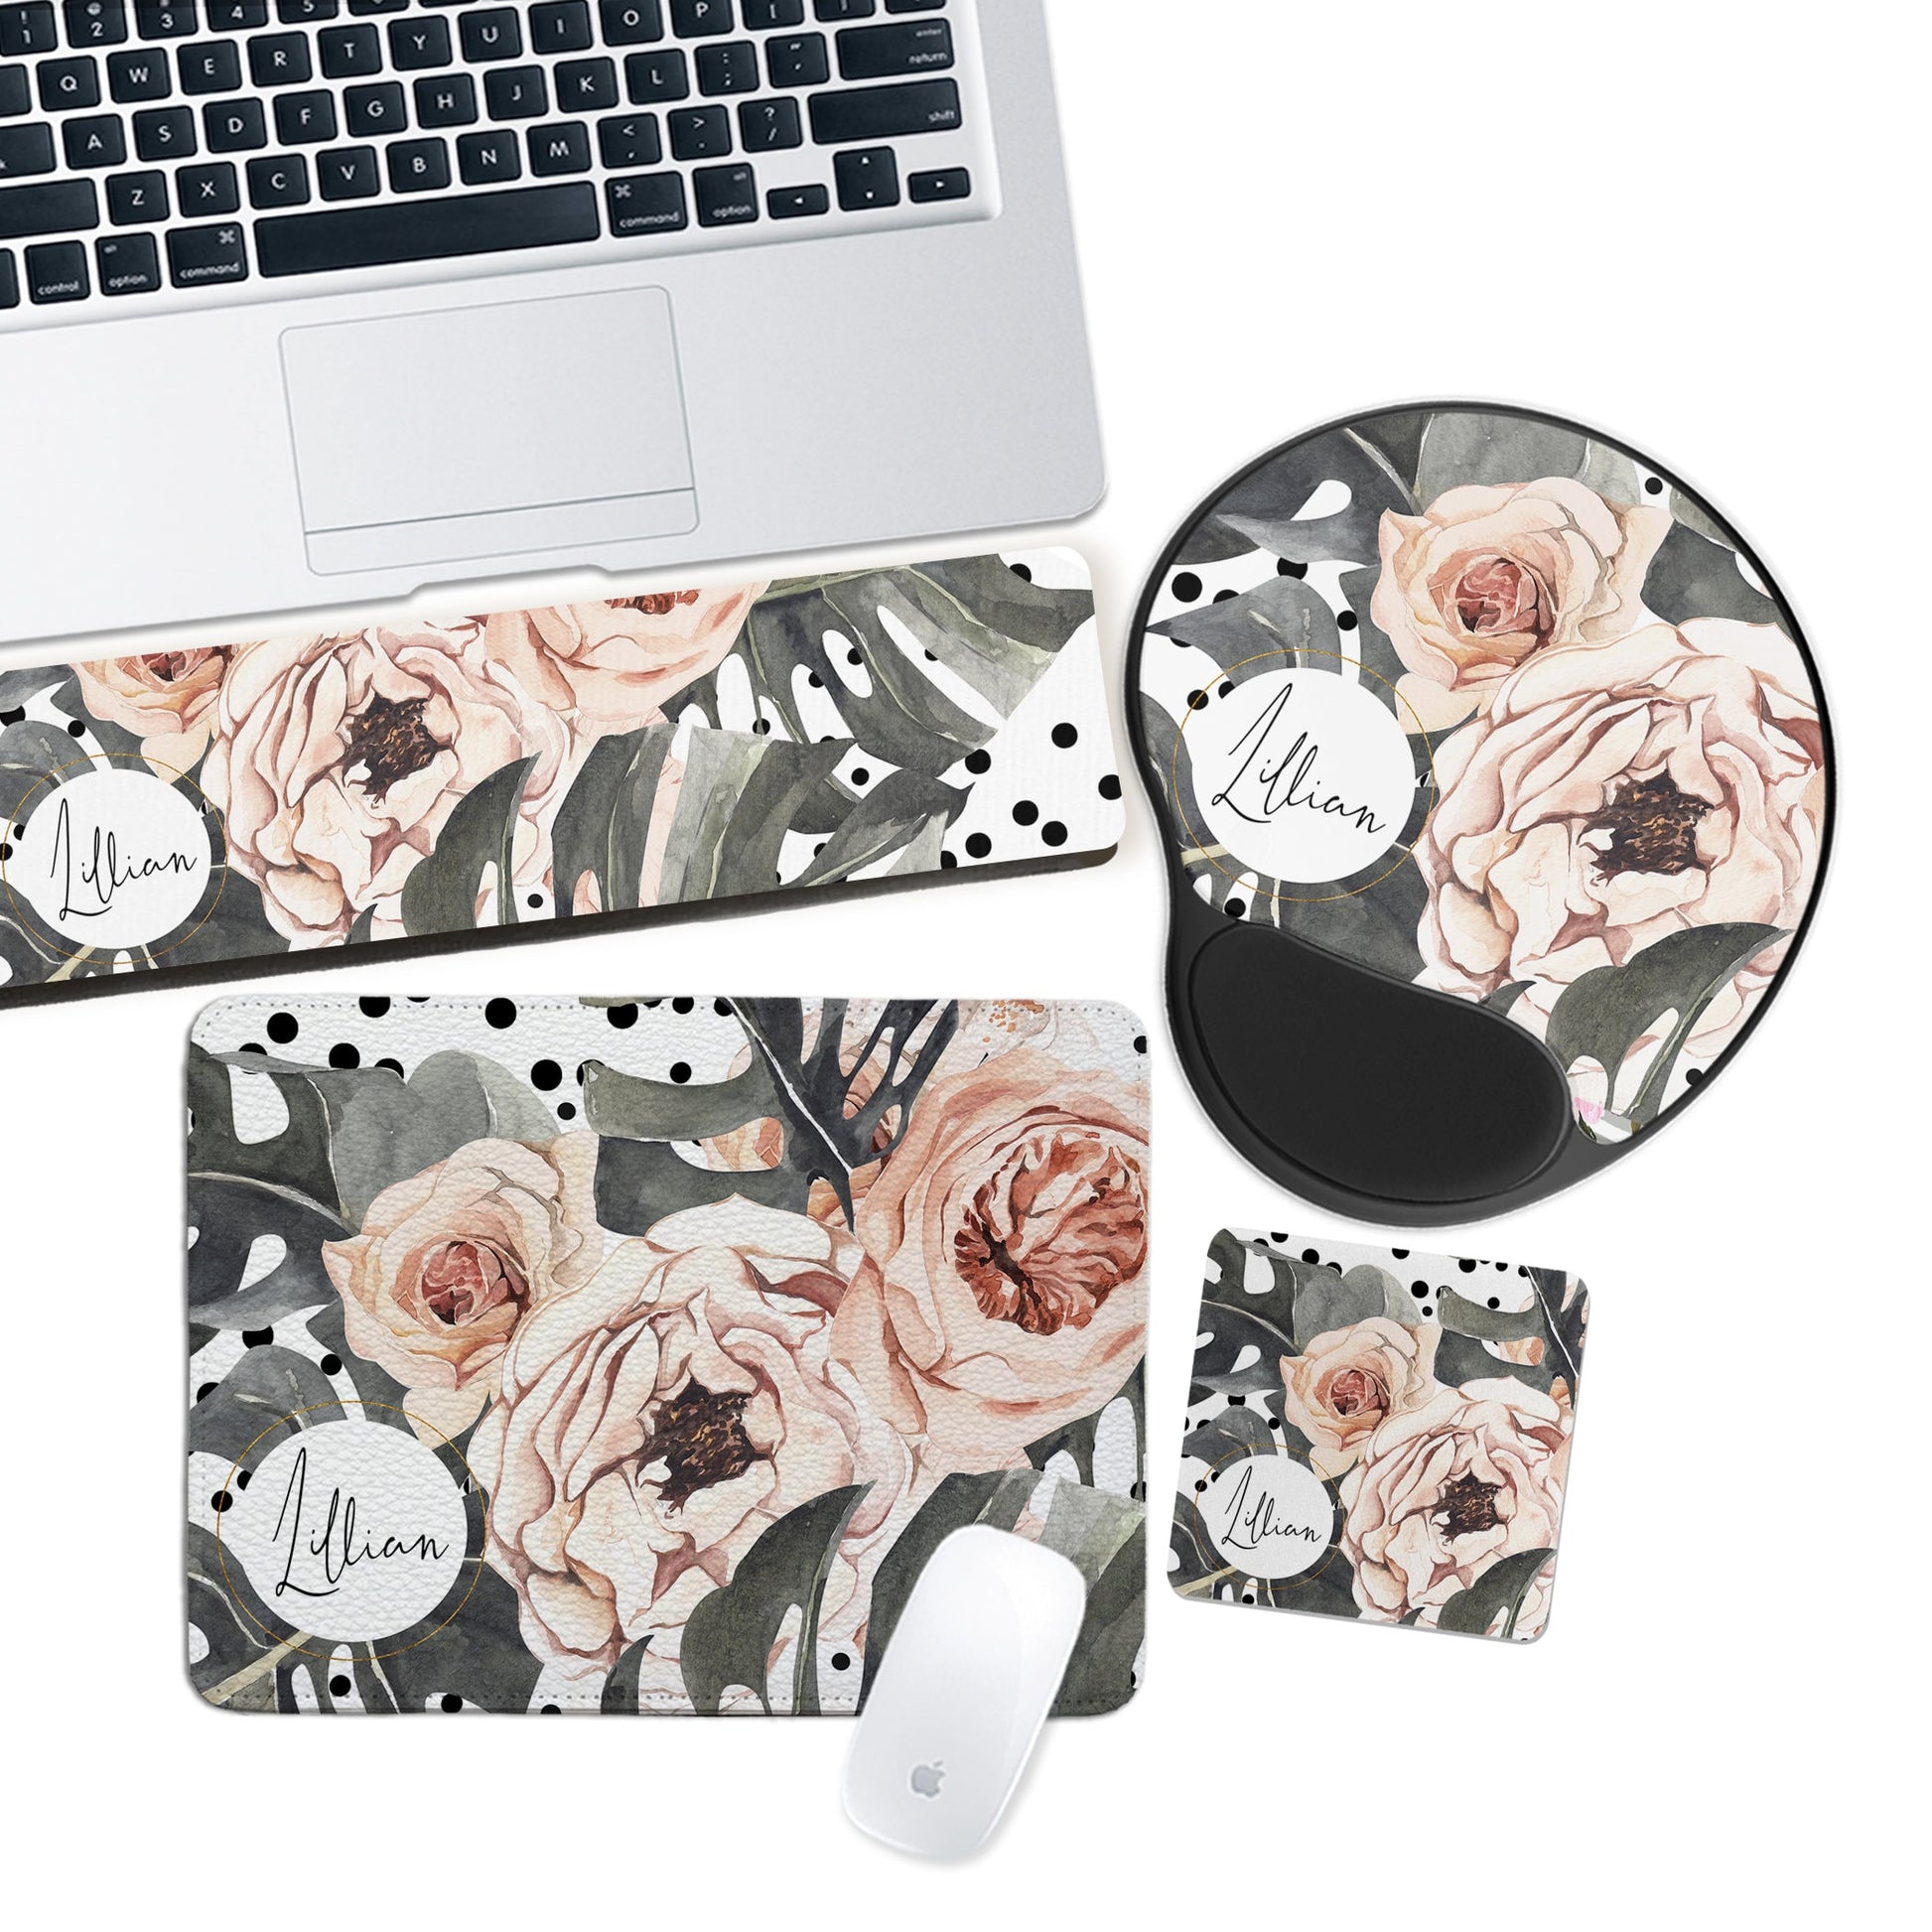 Leather Personalized Mouse Pads, Keyboard Wrist Rest, Custom Gel Mouse Pad, Monogram MousePad, Mousepad, Tropical Vintage Florals